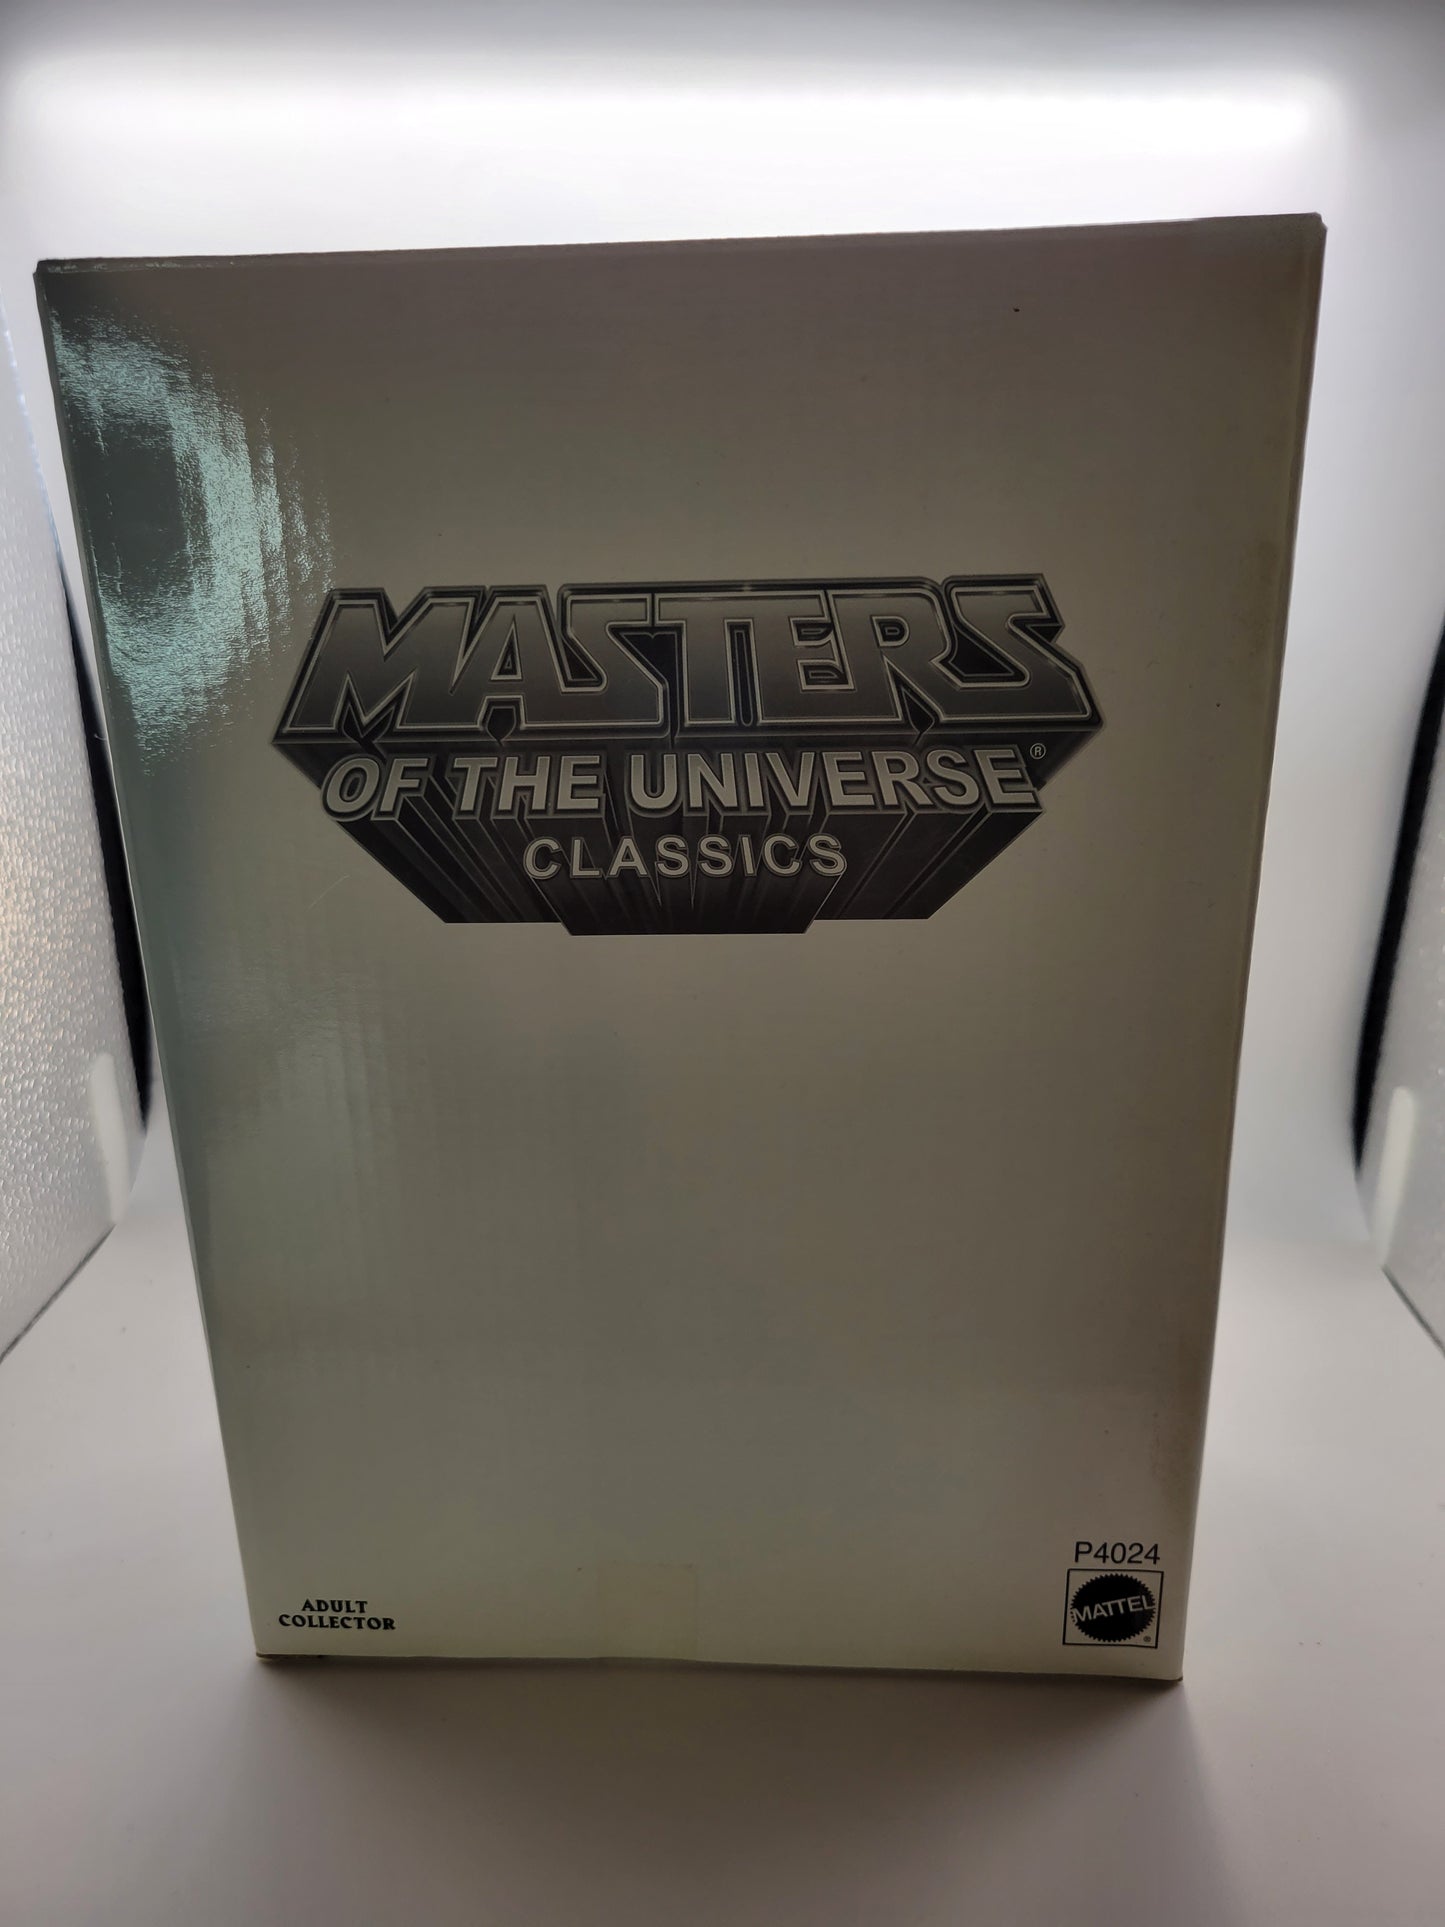 Mattel 2009 Matty Collector Masters of the Universe Classics Webstor Action Figure